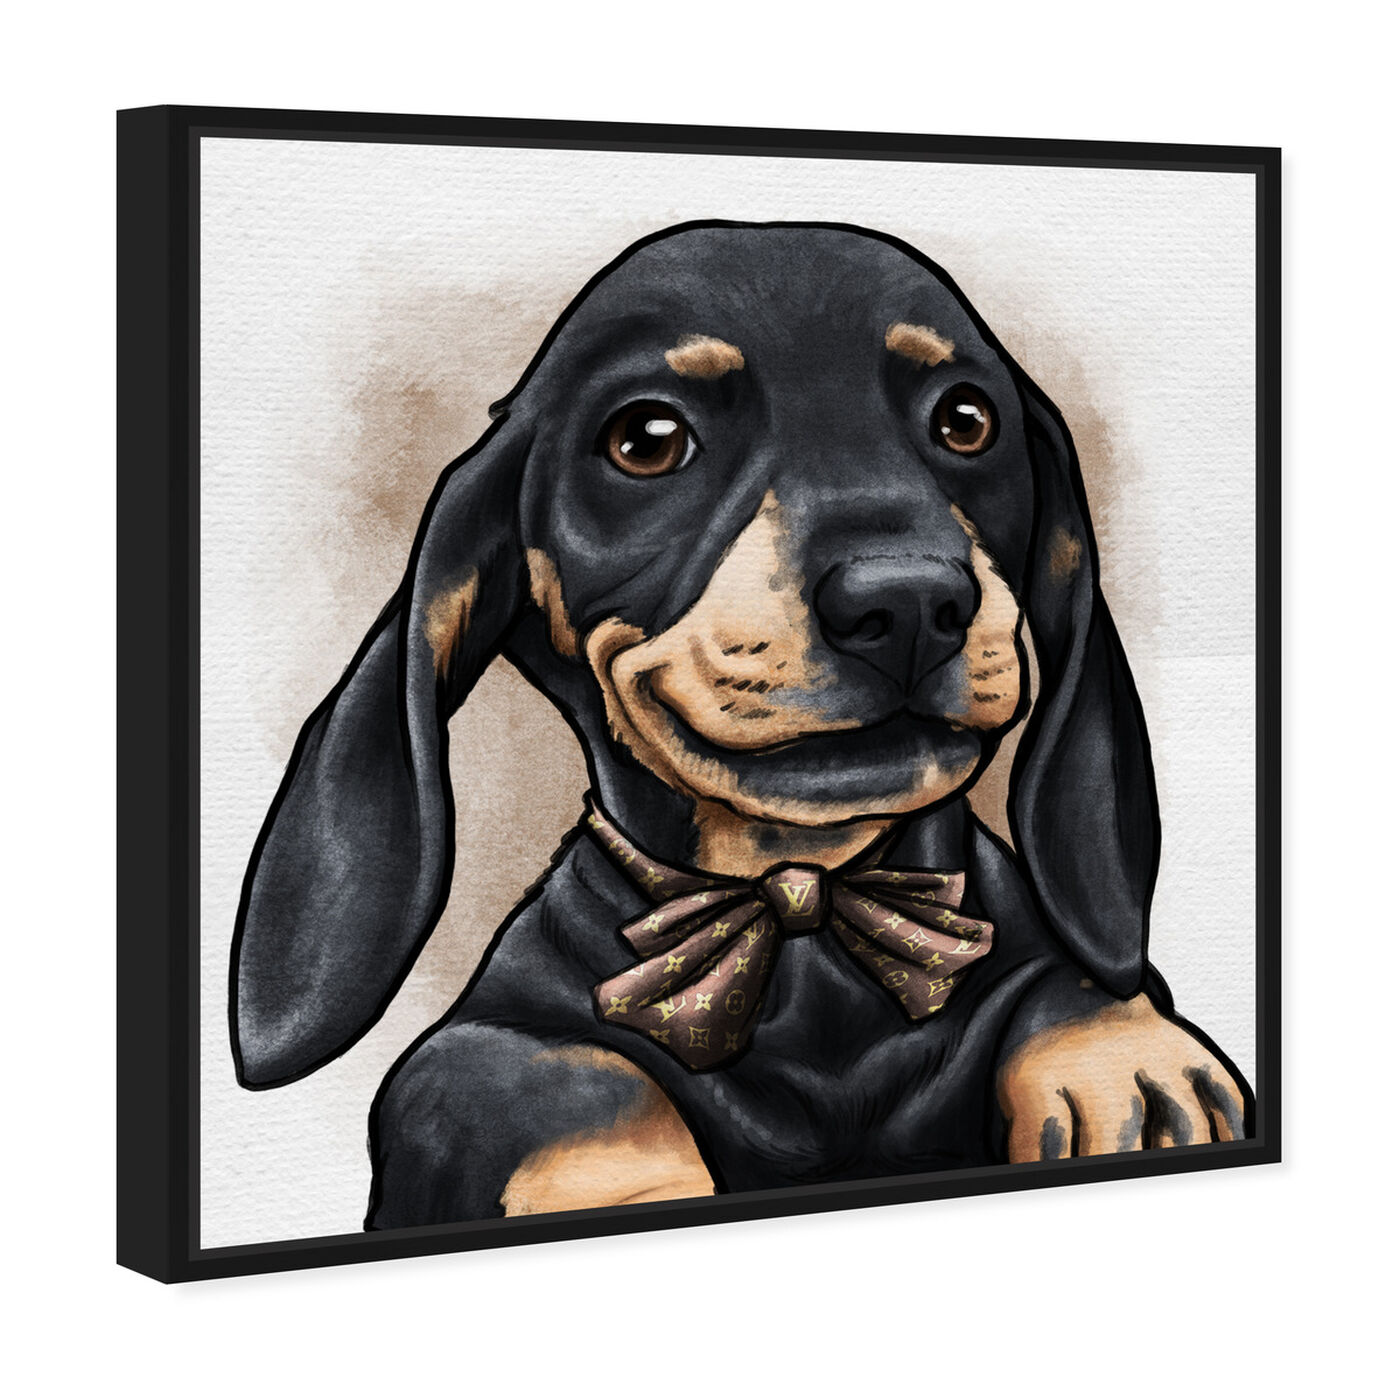 Angled view of Dapper Dachshund featuring animals and dogs and puppies art.